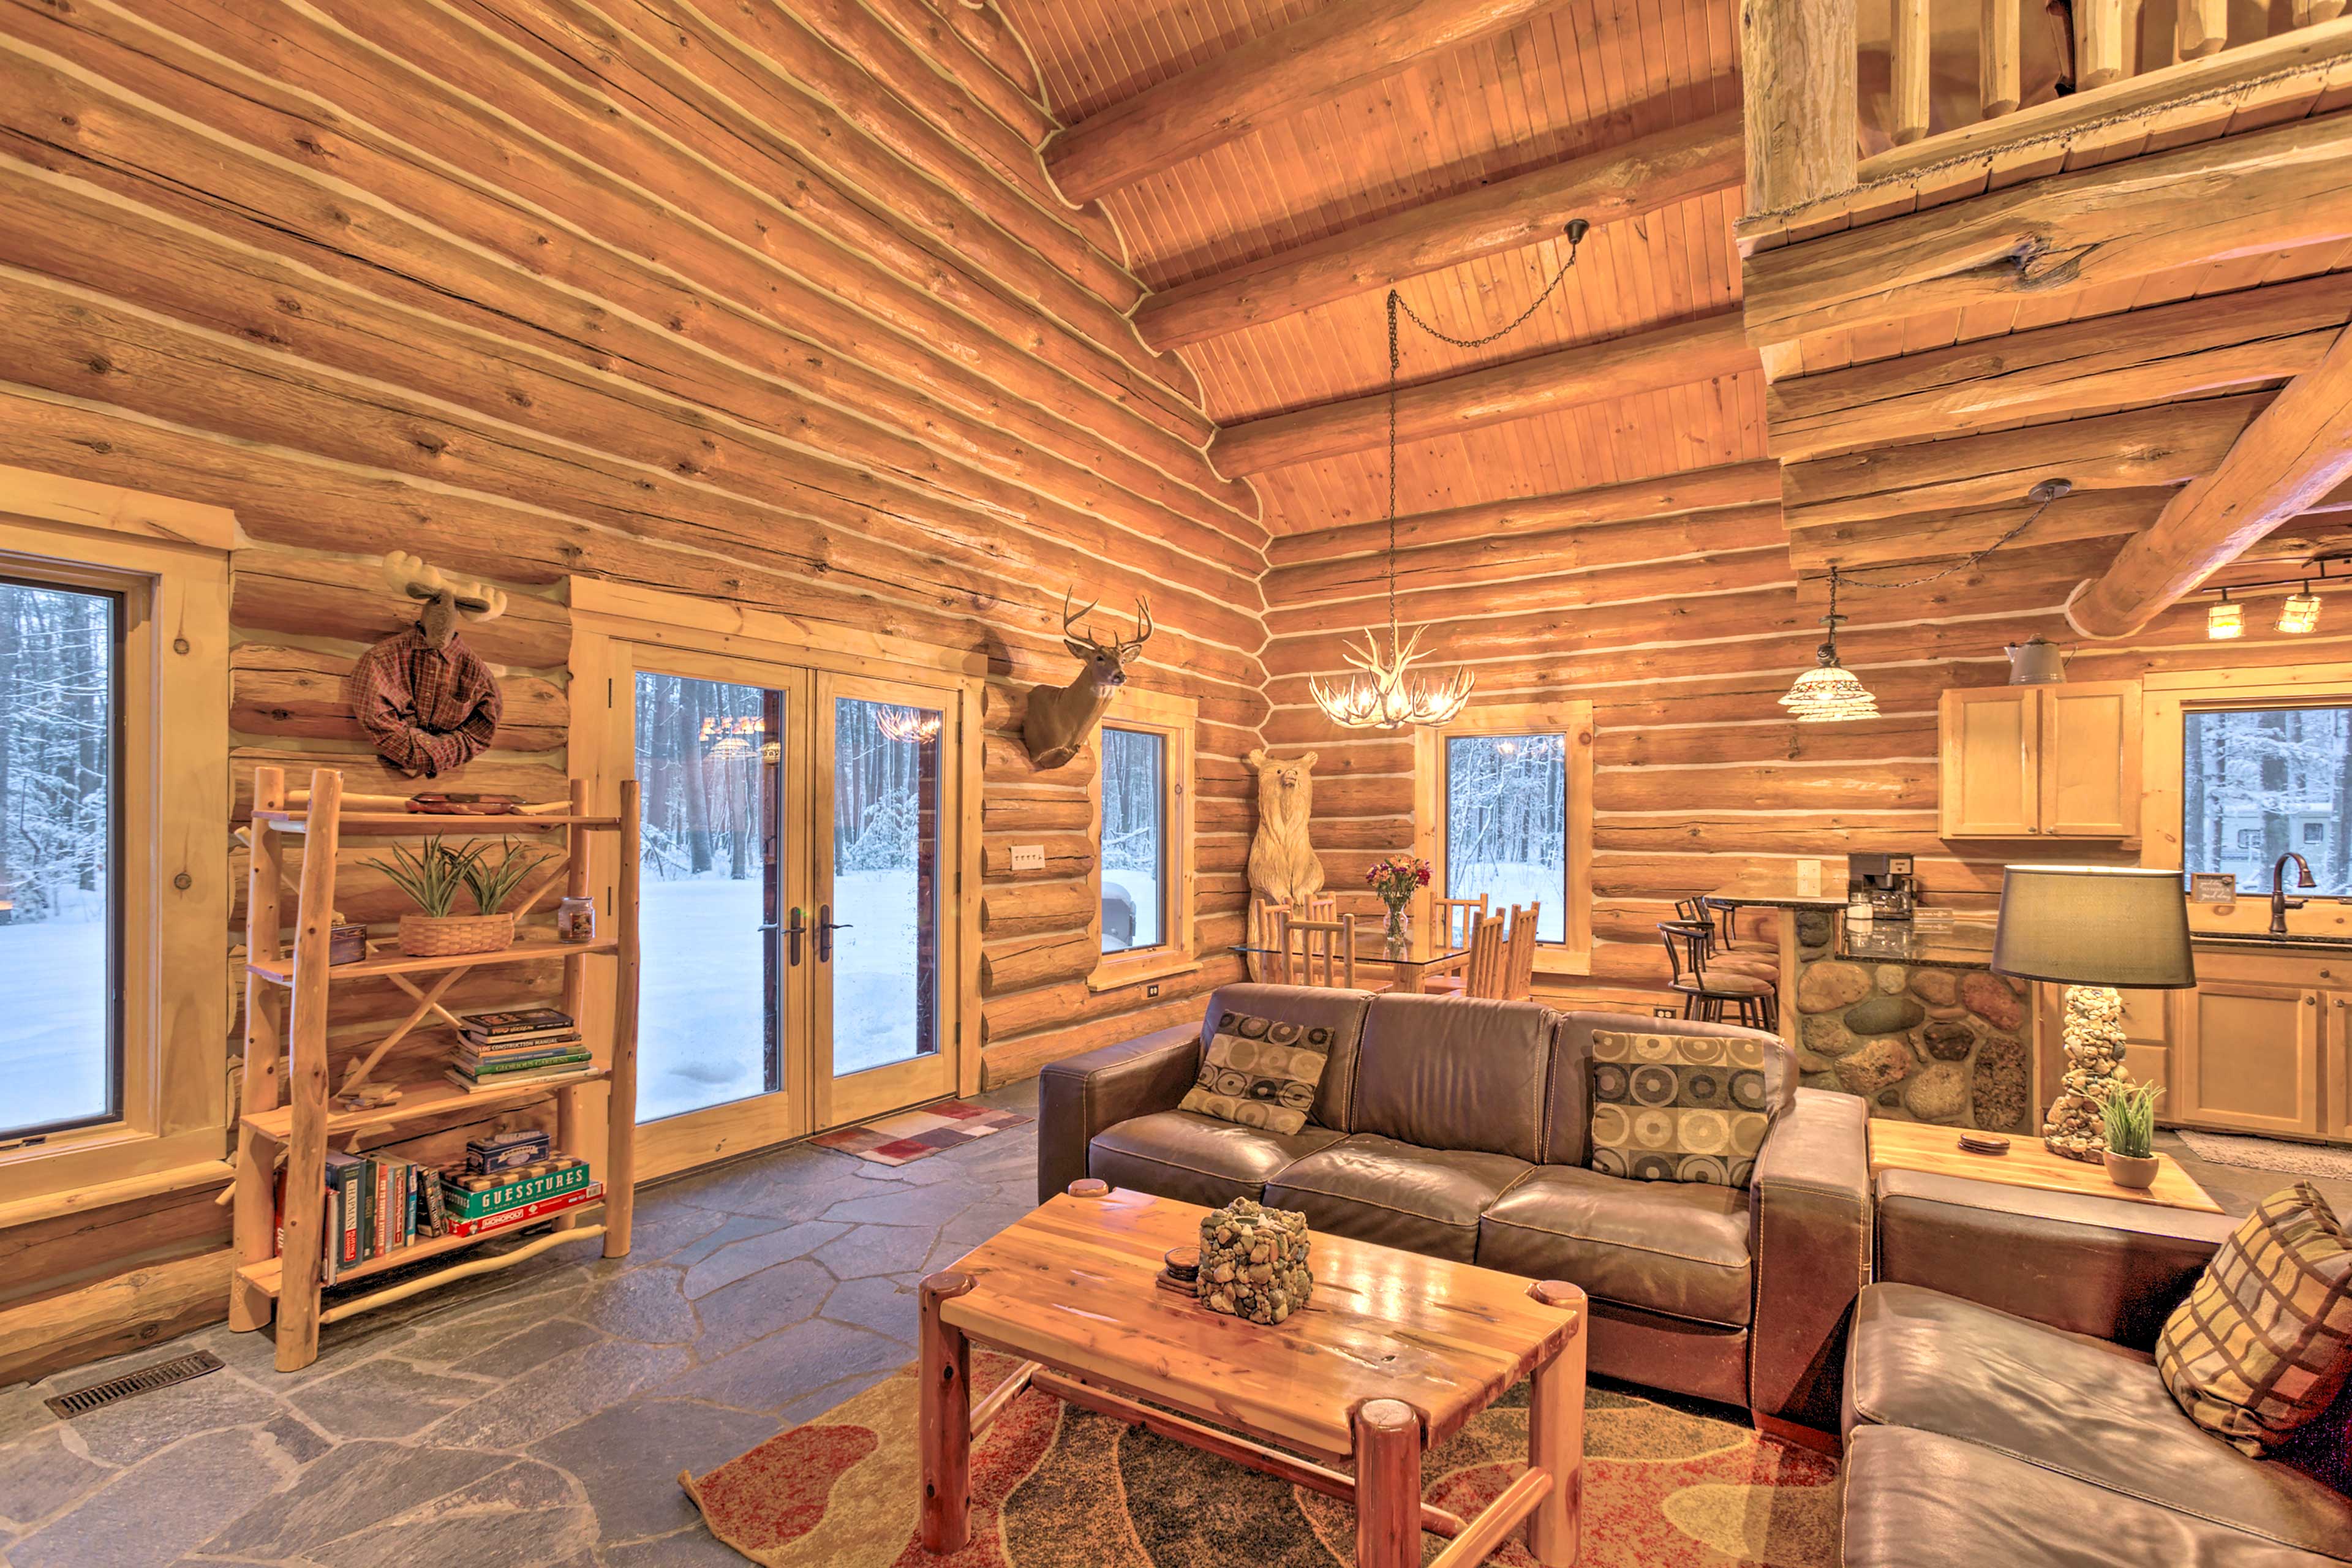 Secluded Cabin - Short Drive to Traverse City